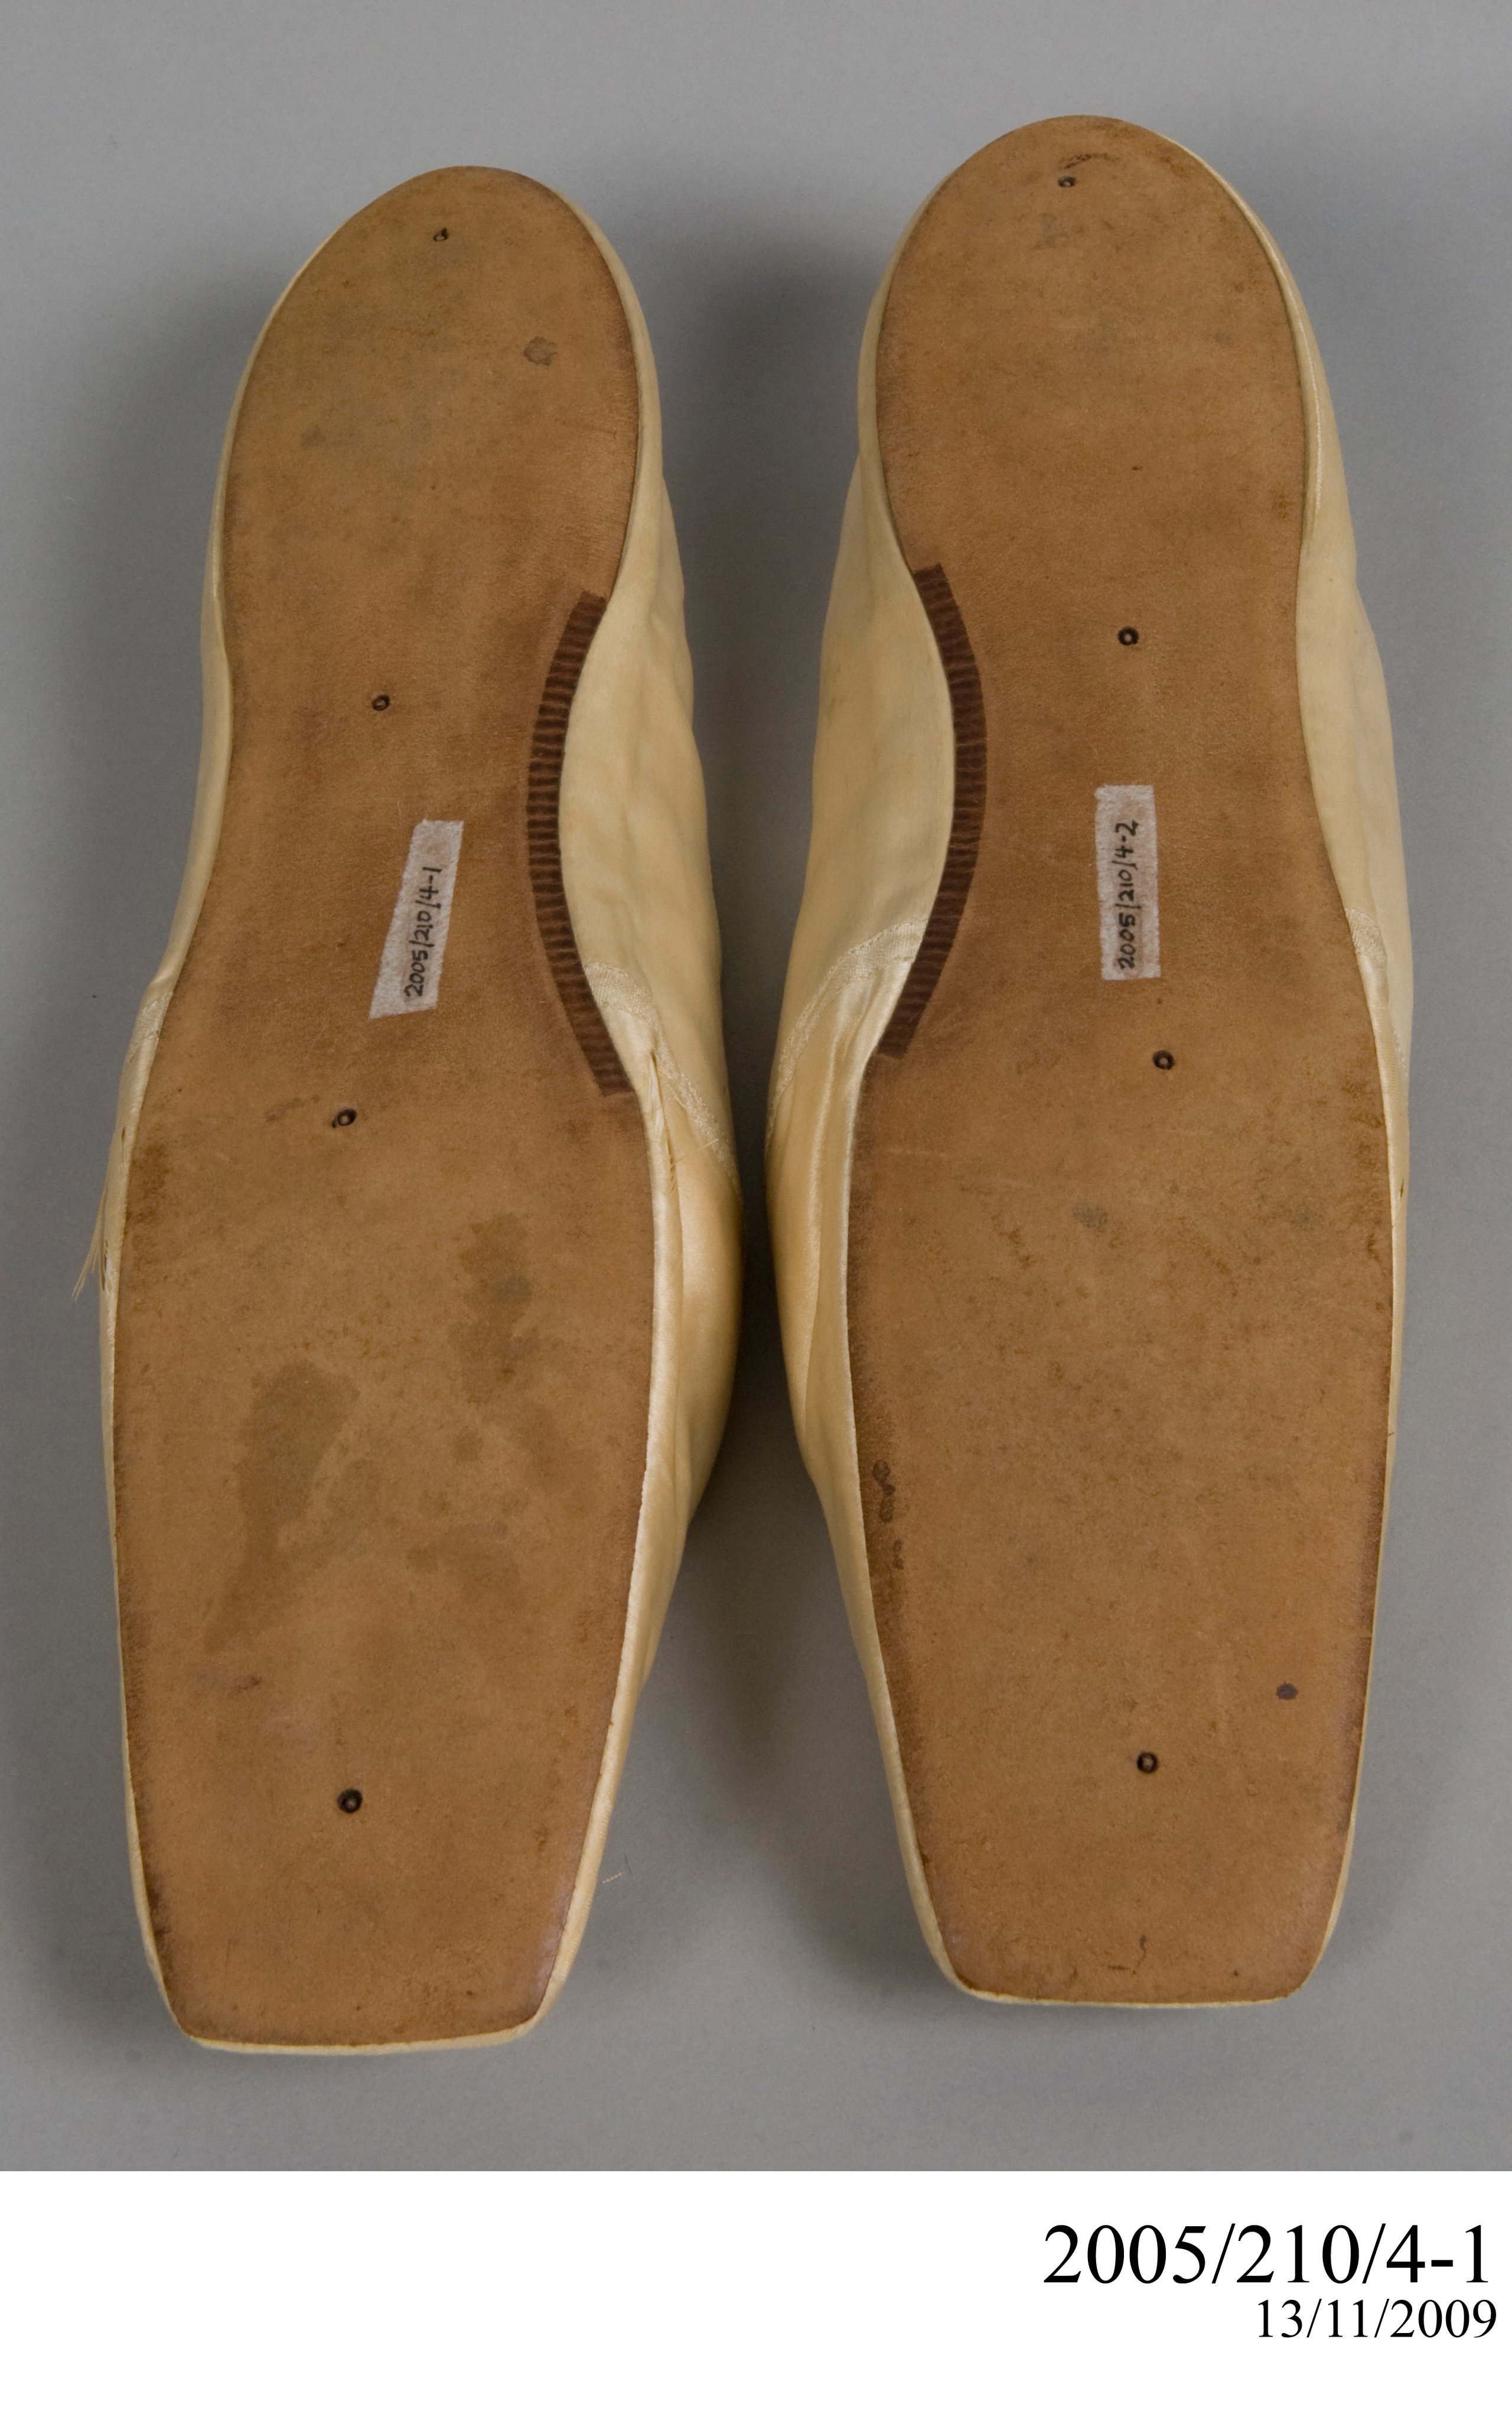 Pair of wedding shoes by Walter & Co worn by Agnes Thompson